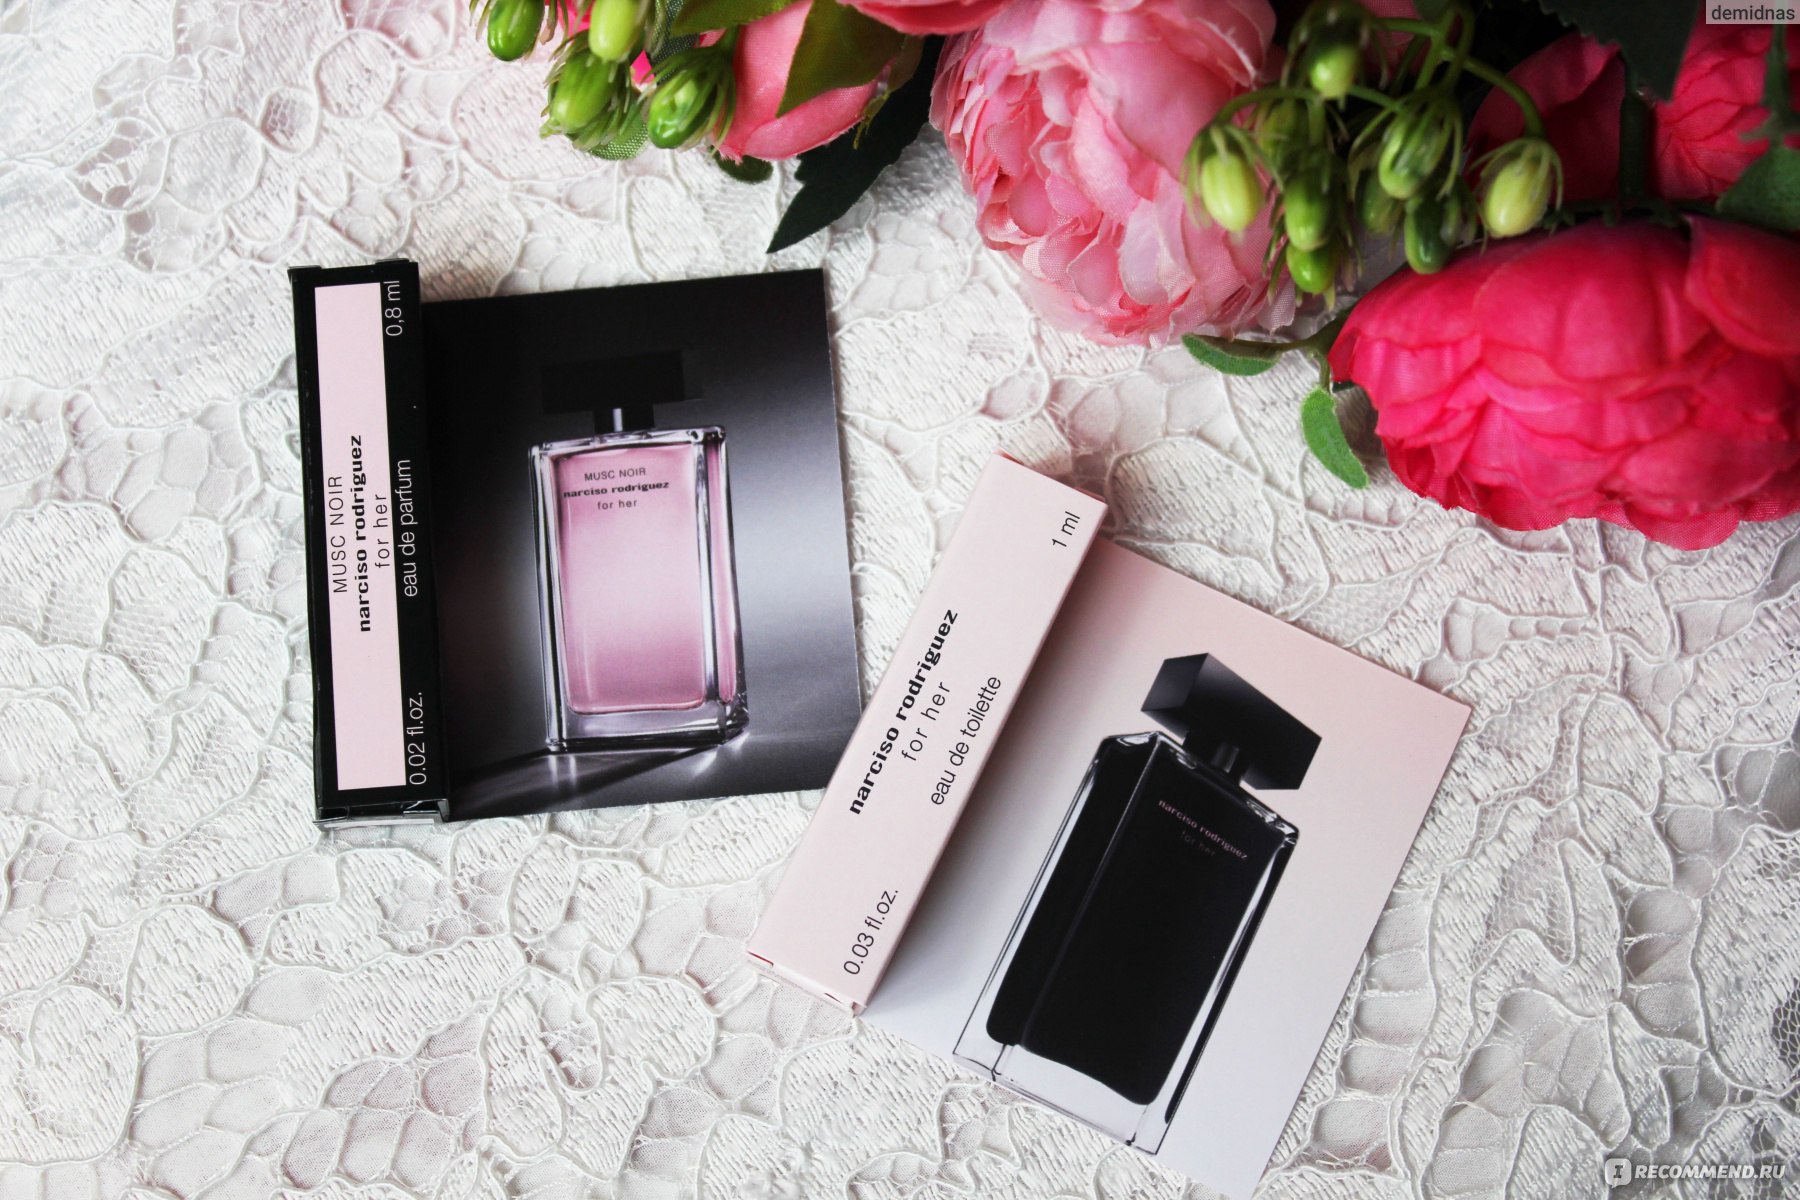 Narciso rodriguez musc noir rose. Narciso Rodriguez for her Musc Pure 50мл. Narciso Rodriguez for her Pure Musc EDP 7.5ml. Narciso Rodriguez for her Musc Noir 10 мл. Narciso Rodriguez Musc Noir Rose - 50 ml.